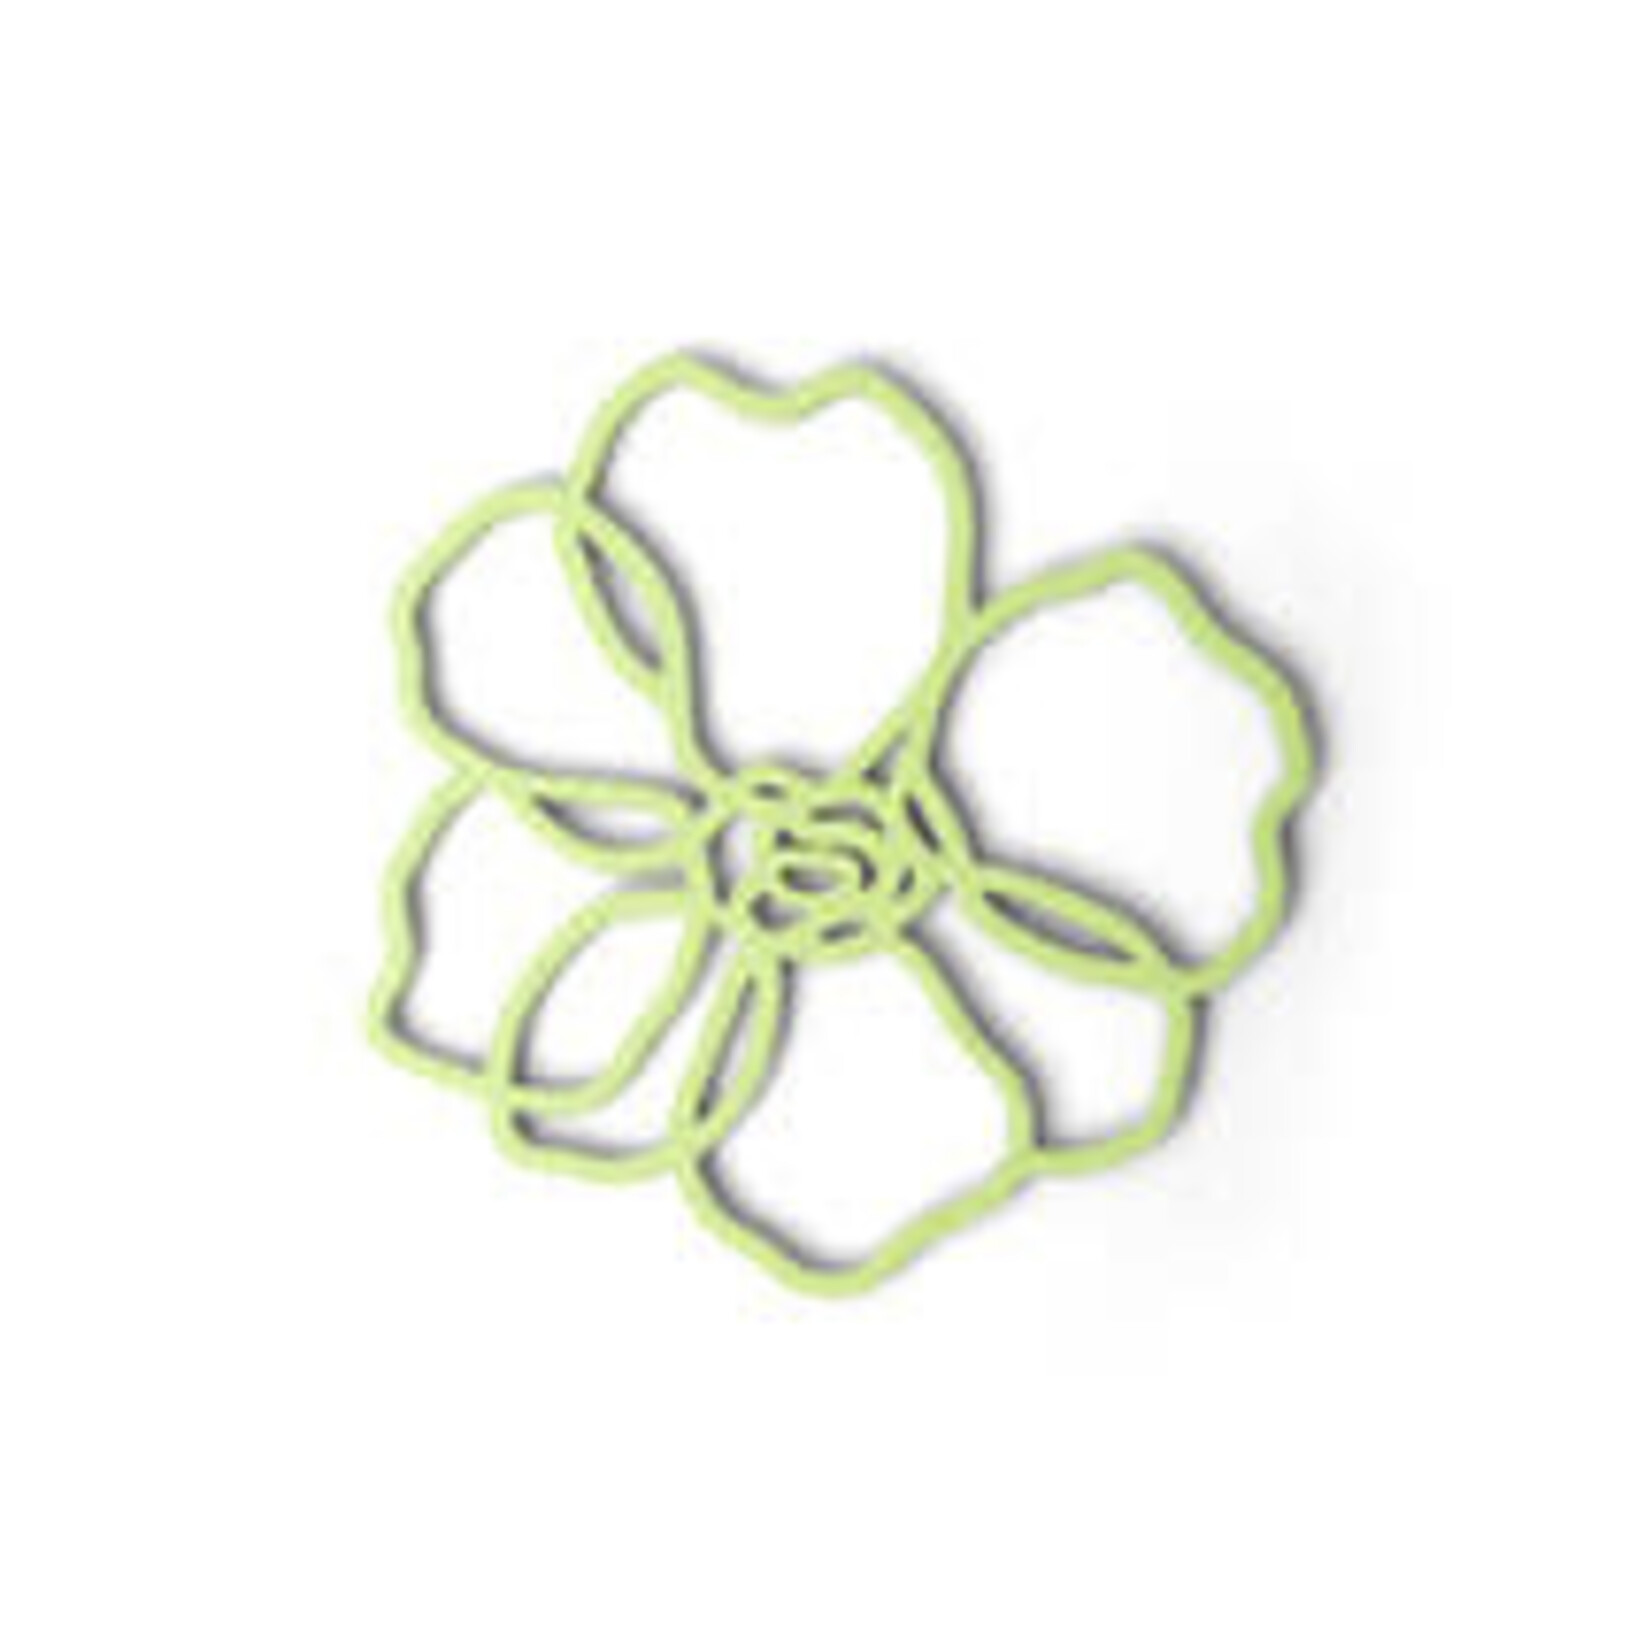 Tools2cook Flower Anemone Green pannenonderzetter Tools2cook Anemone Green onderzetter 2000508